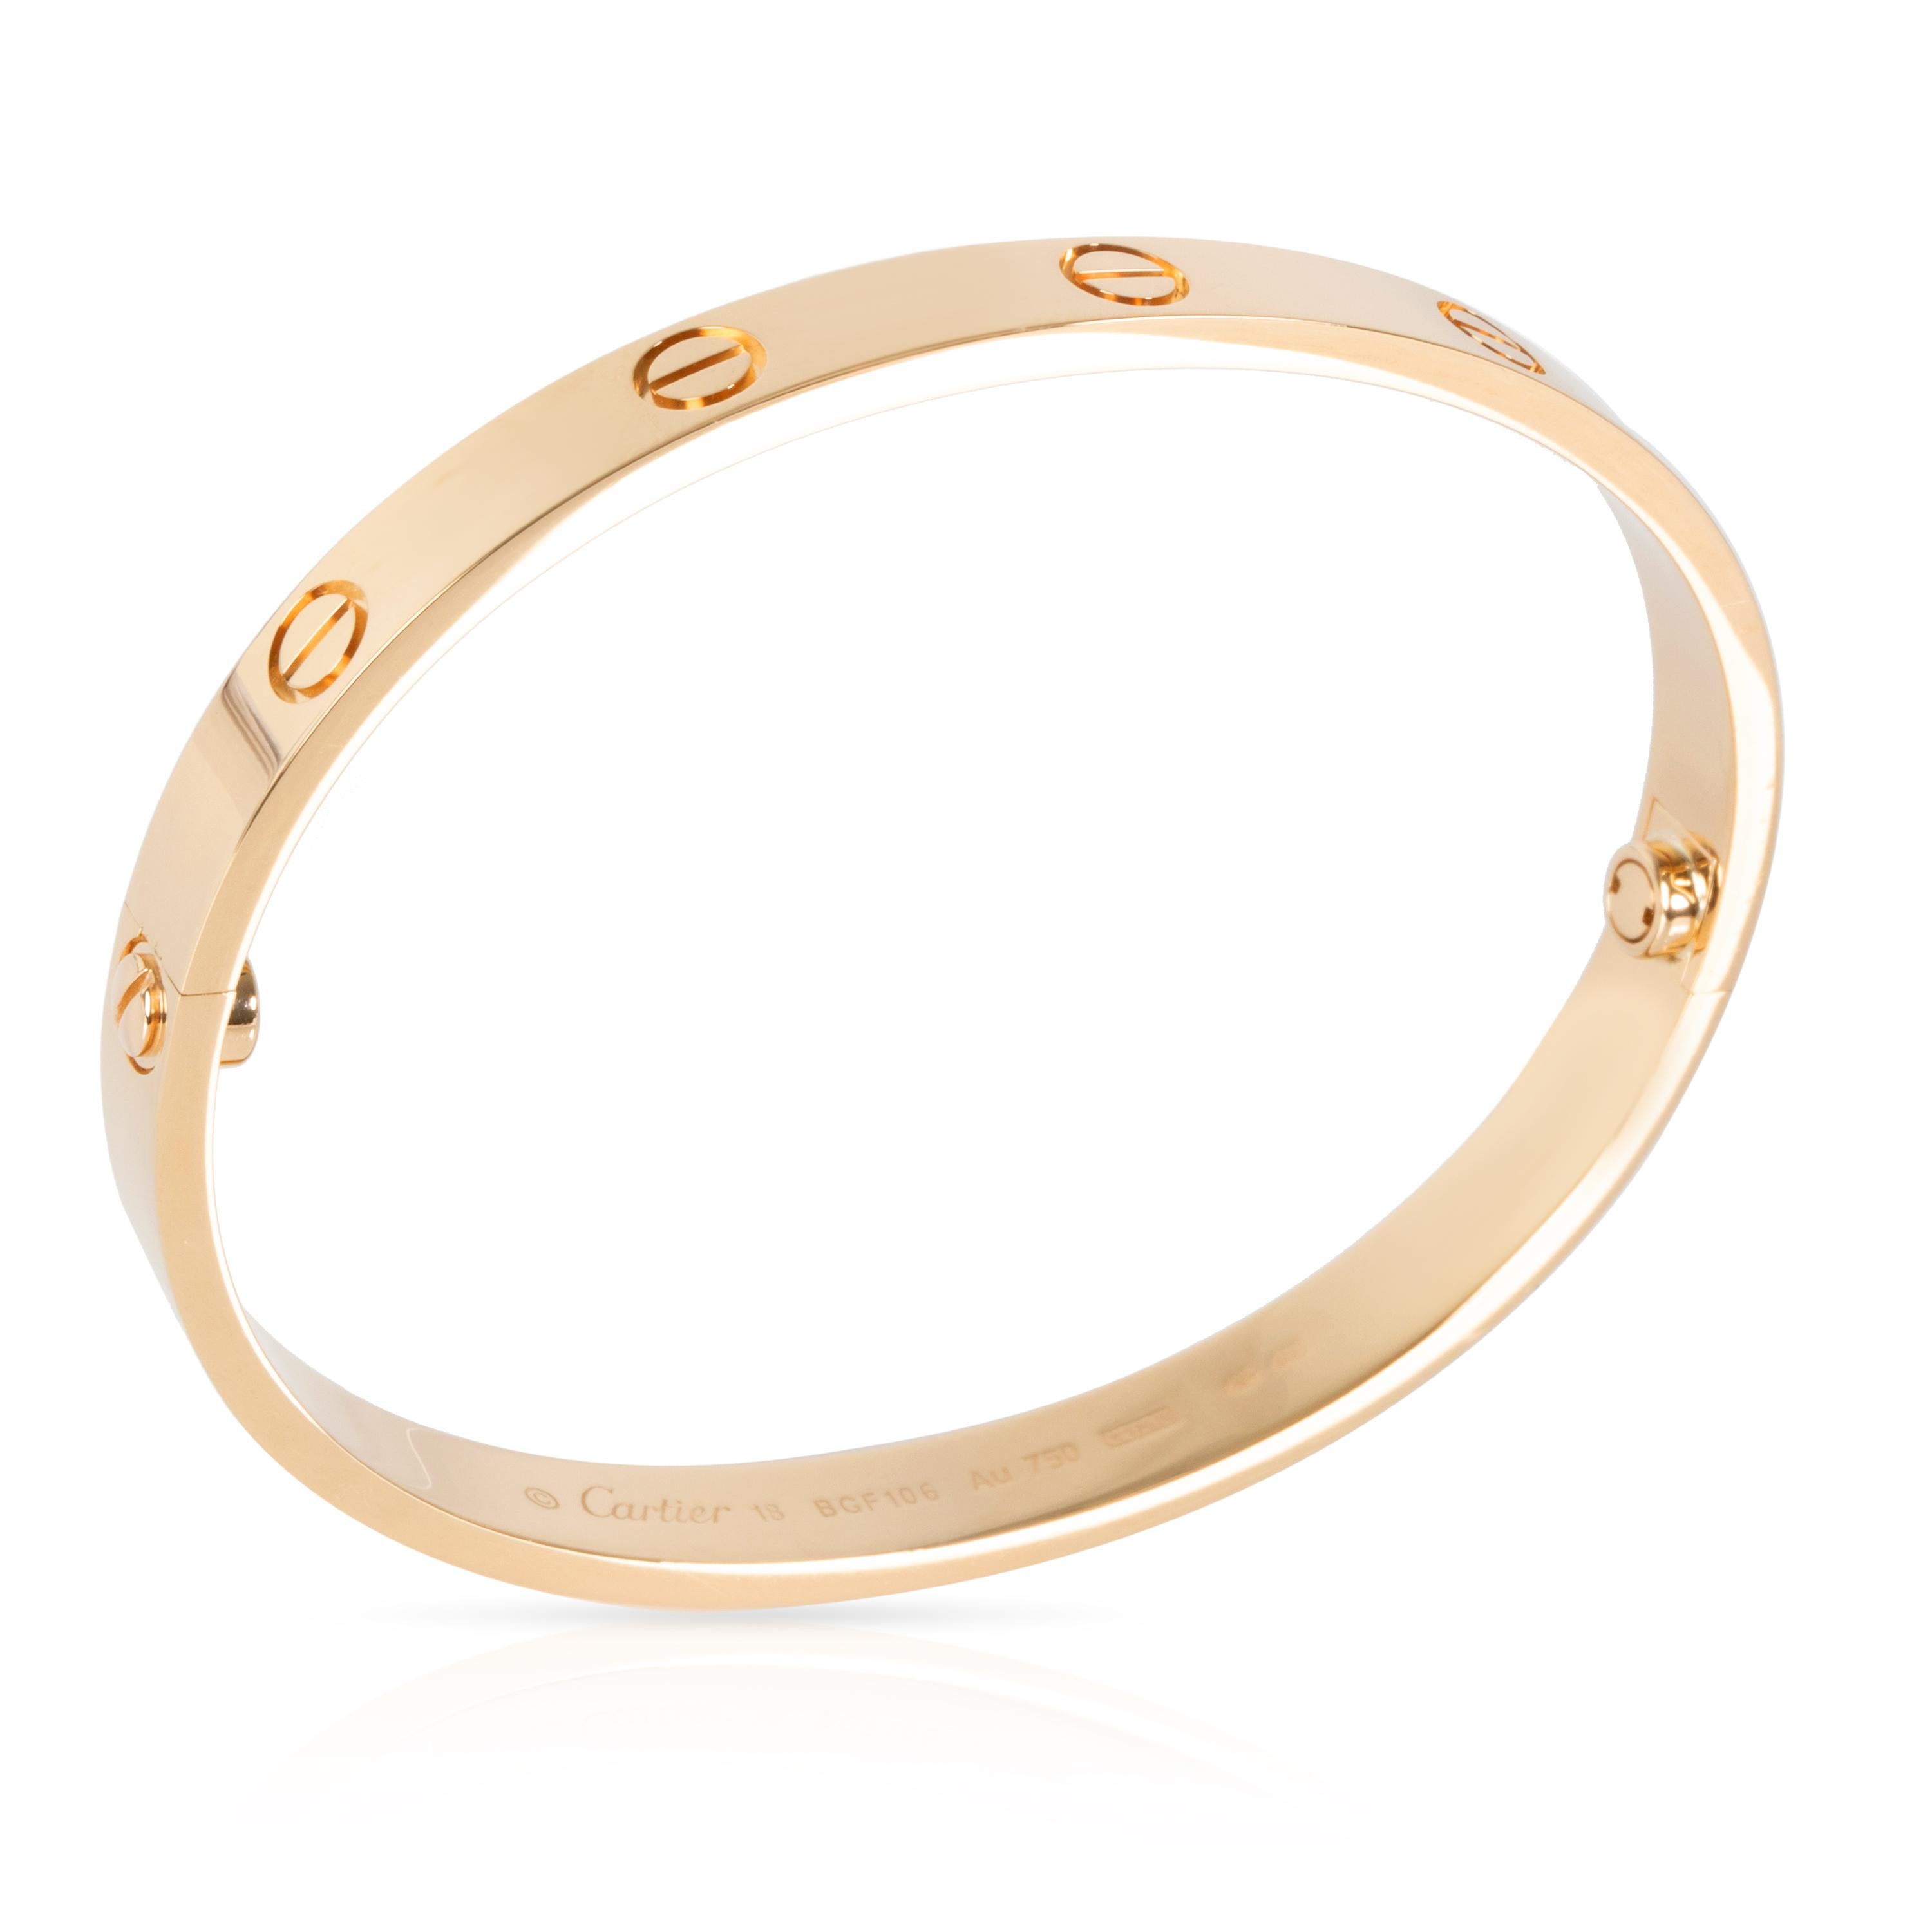 
Cartier Love Bracelet in 18K Yellow Gold

PRIMARY DETAILS
SKU: 105310

Condition Description: Retails for 6,300 USD. In excellent condition and recently polished. Cartier Size 18. Comes with the original box and papers.

Brand: